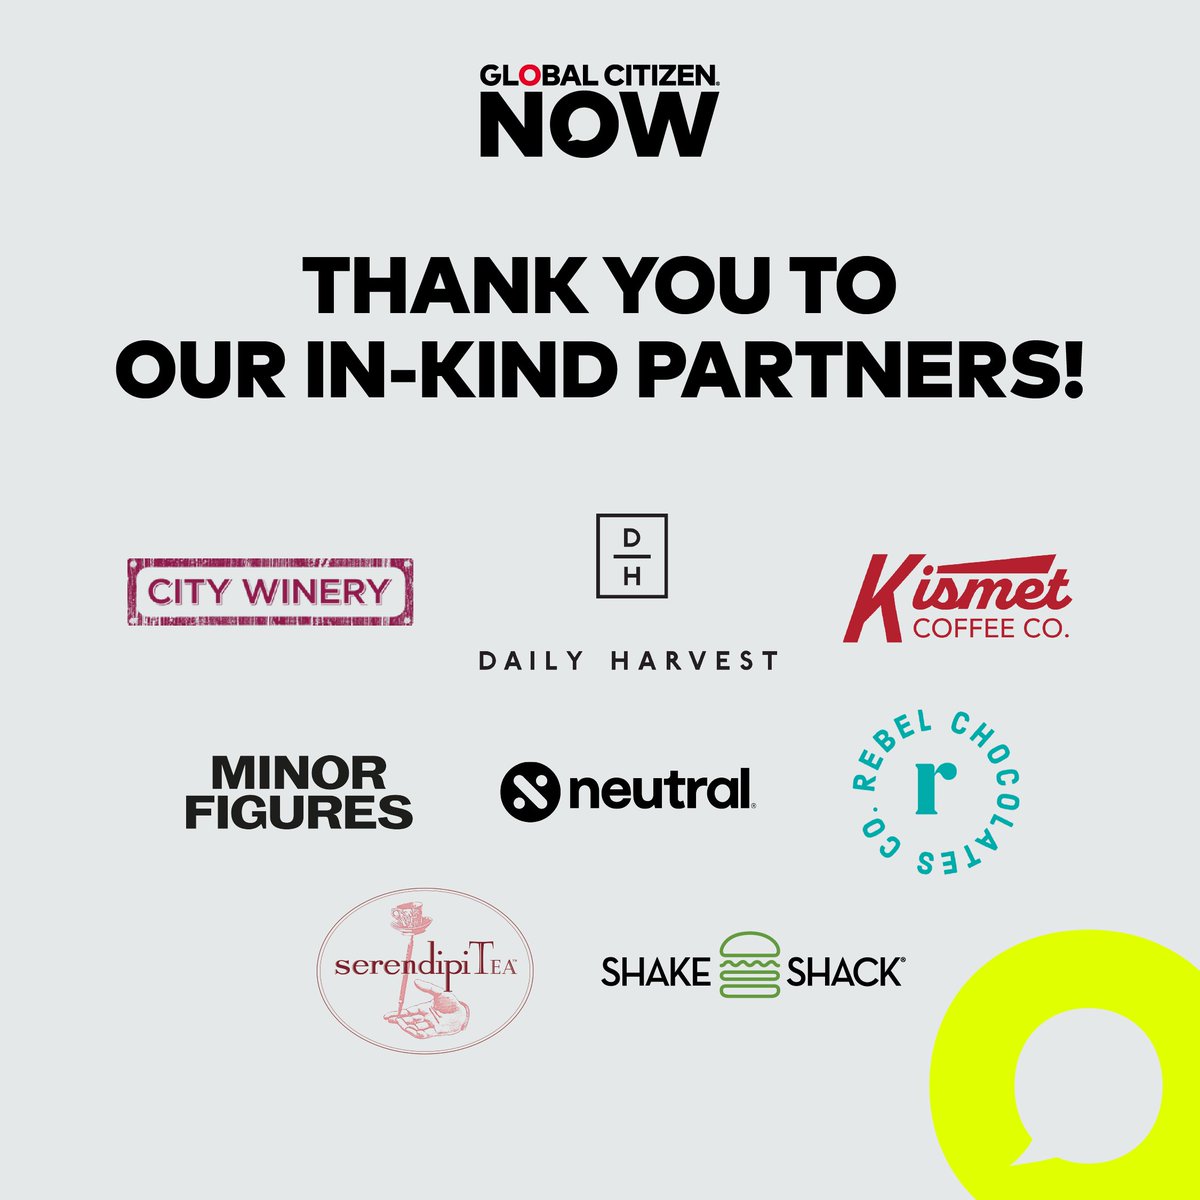 Thank you to our wonderful in-kind partners at #GlobalCitizenNOW for bringing the tasty goodies!